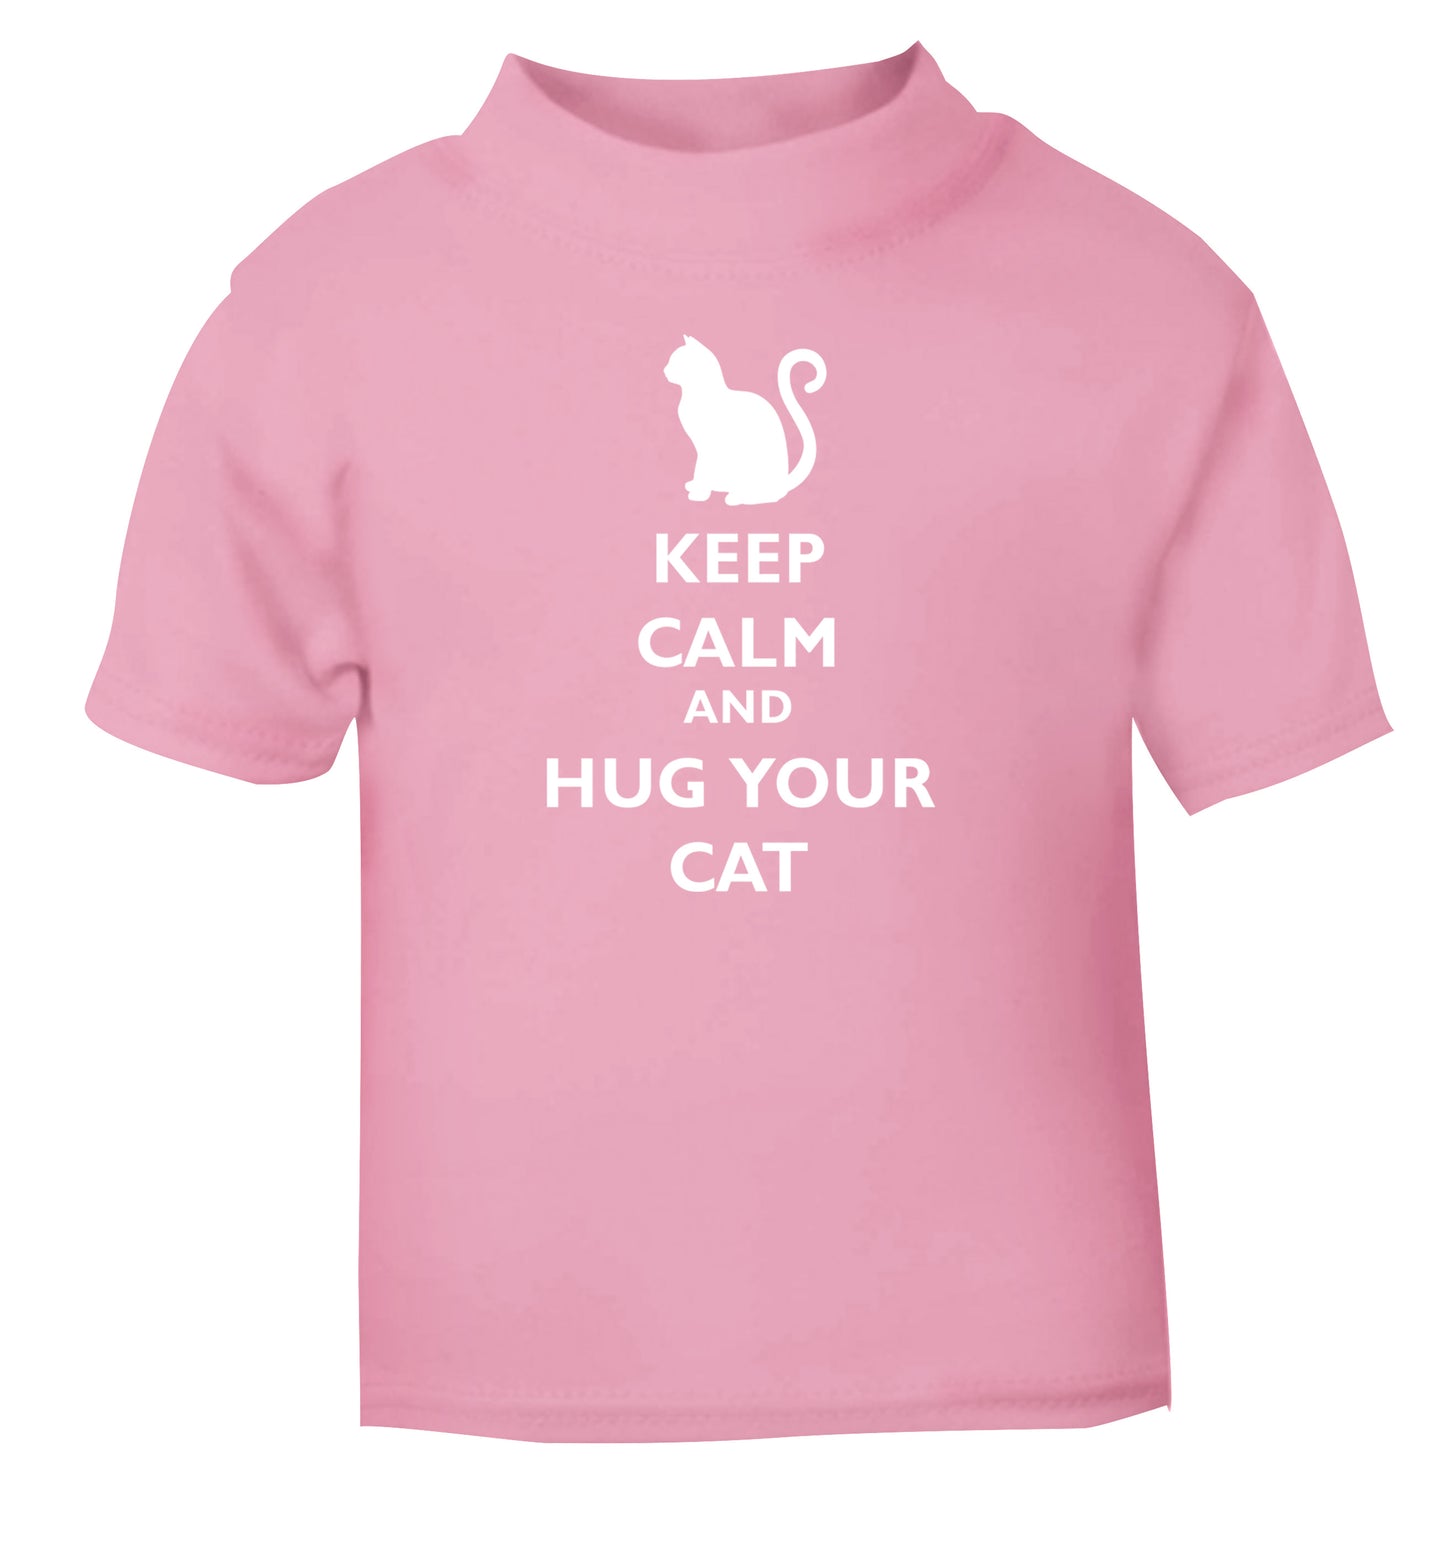 Keep calm and hug your cat light pink Baby Toddler Tshirt 2 Years